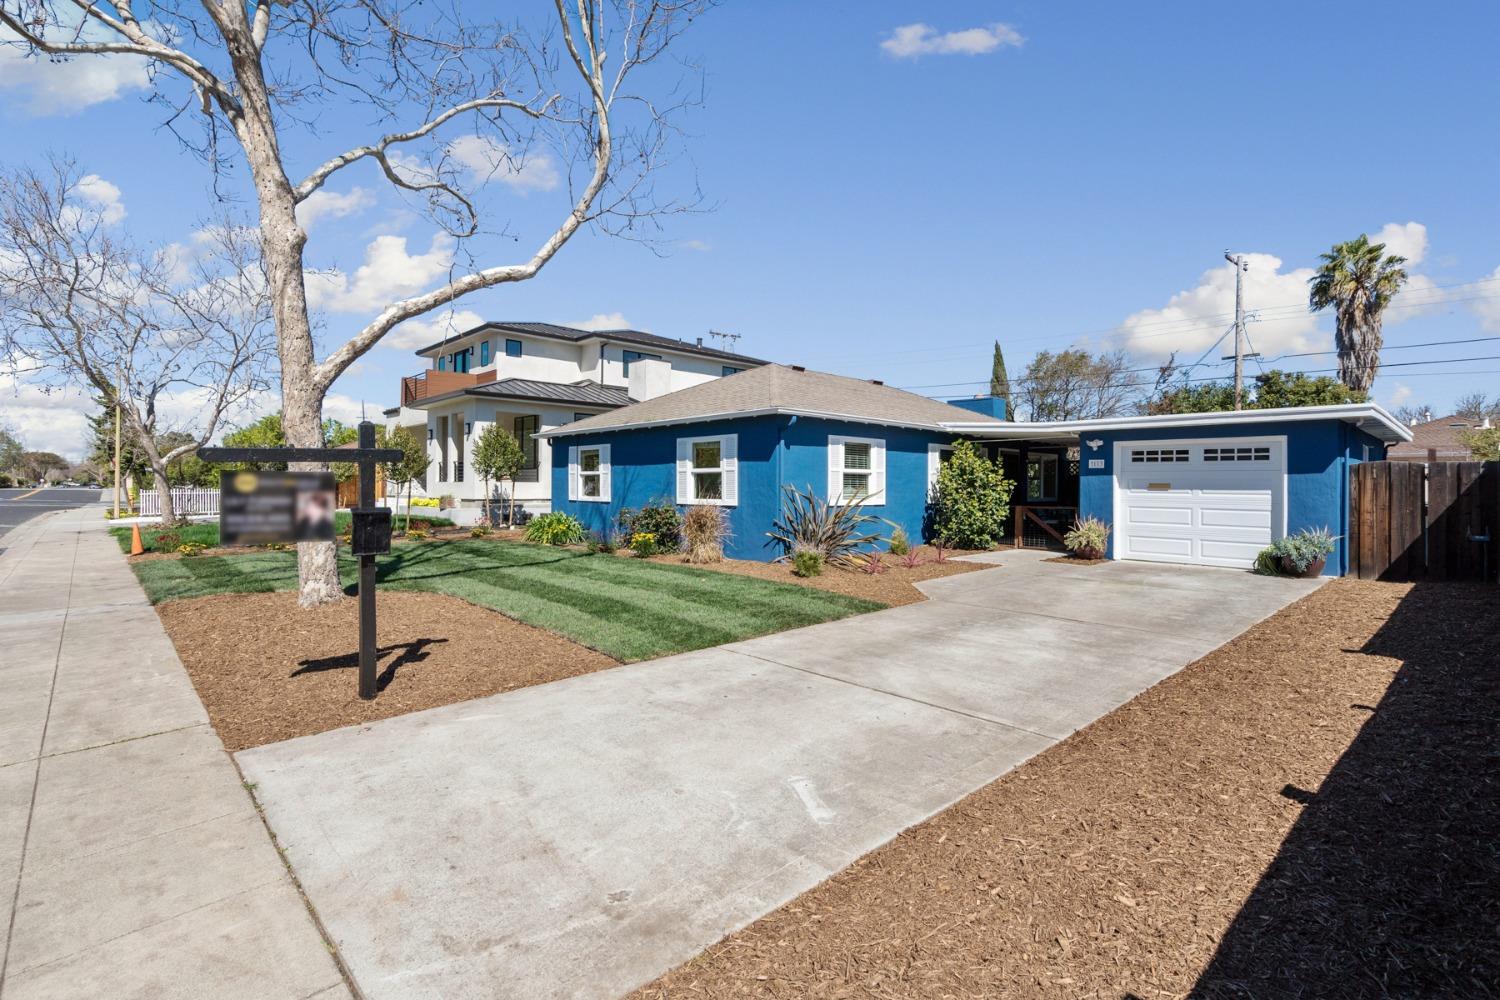 Photo of 3113 Greer Rd in Palo Alto, CA